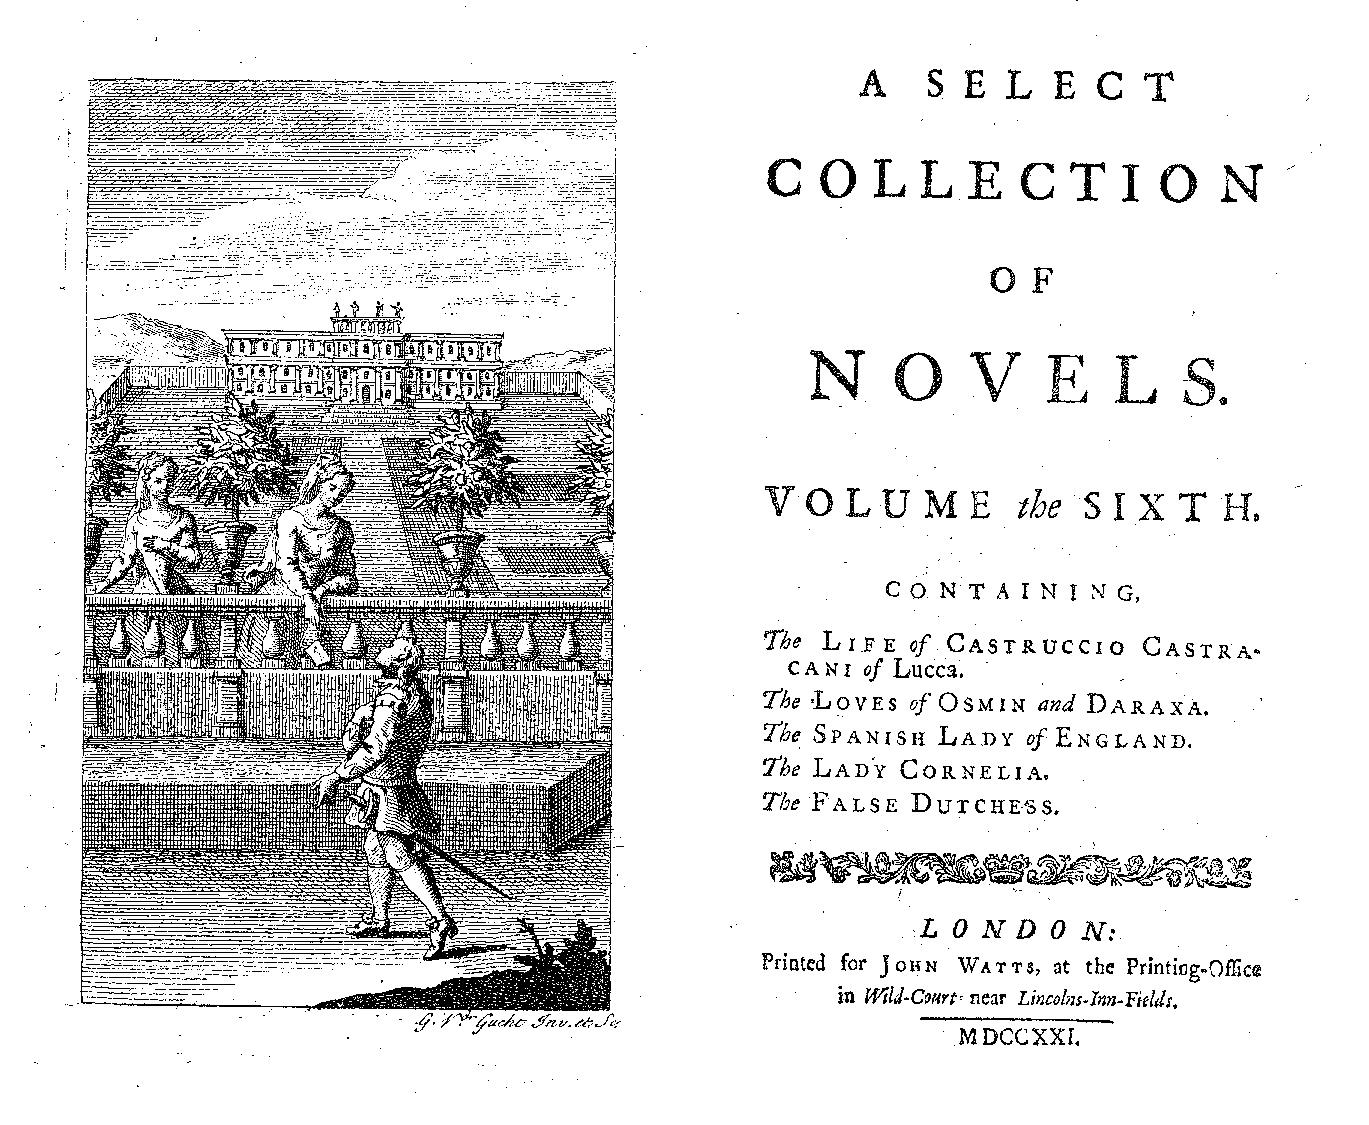 A Select Collection of Novels, 6 (London: J. Watts, 1721).